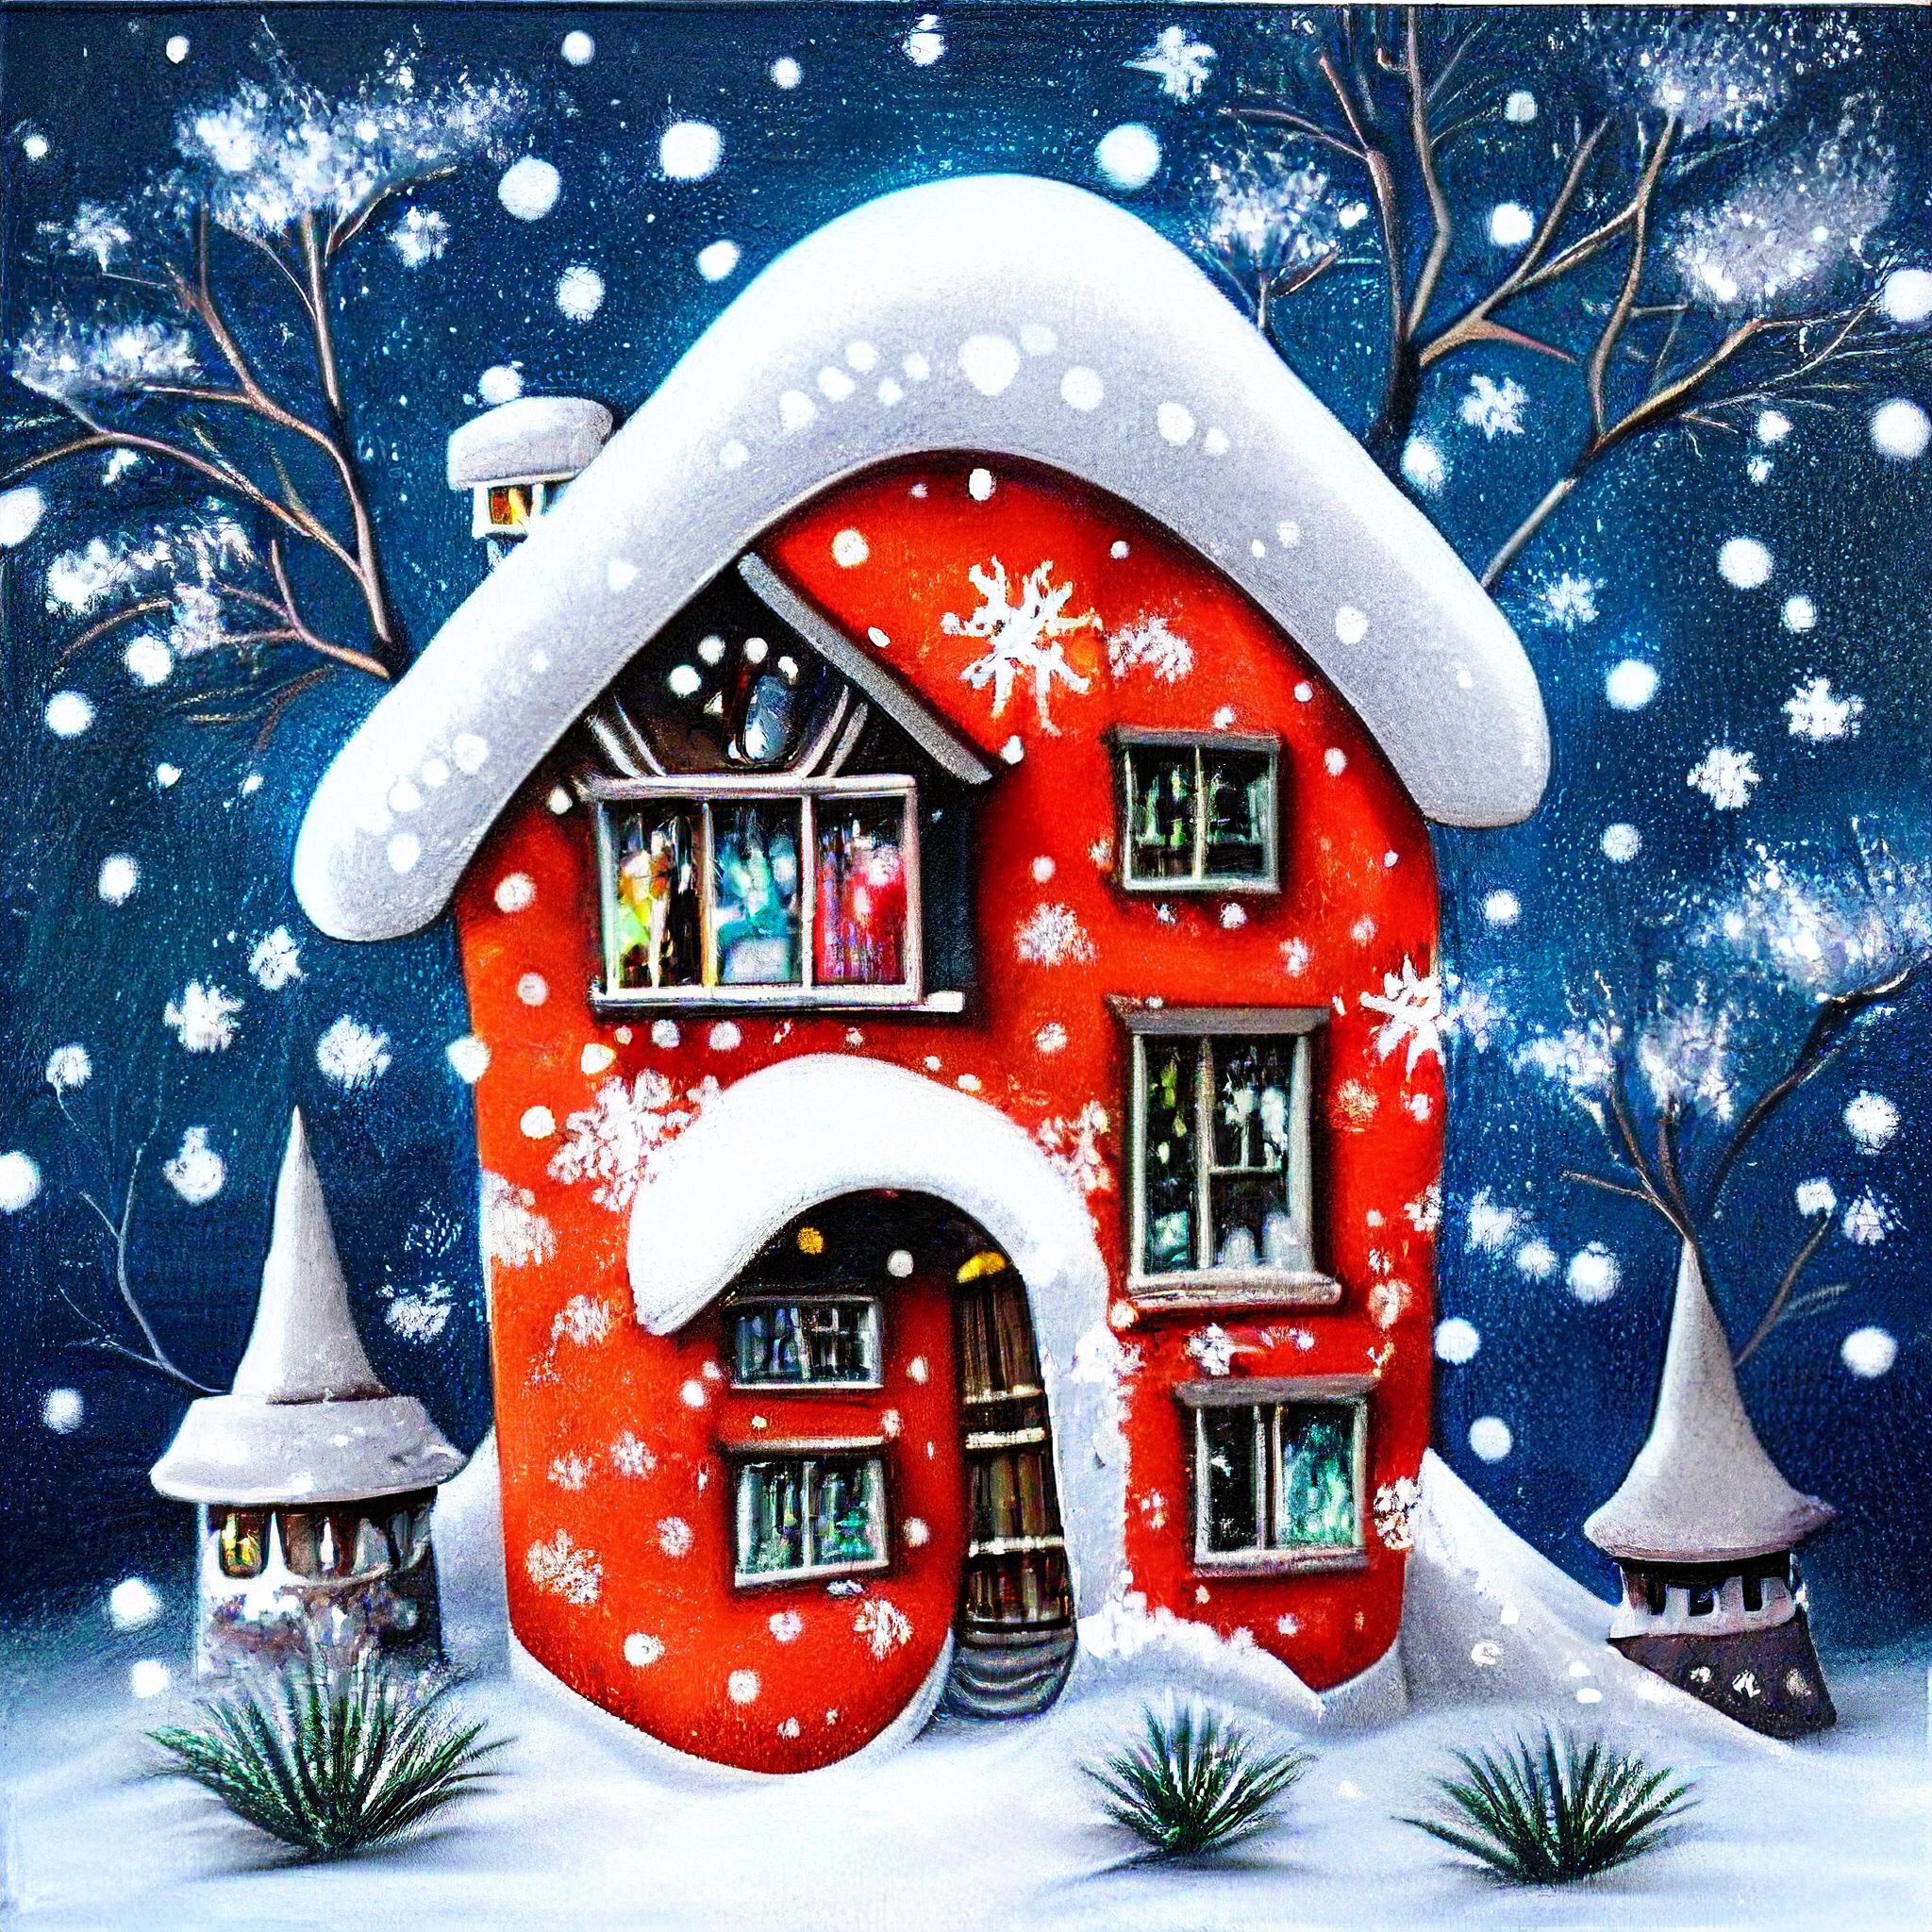 #8 The Red Christmas Monster House